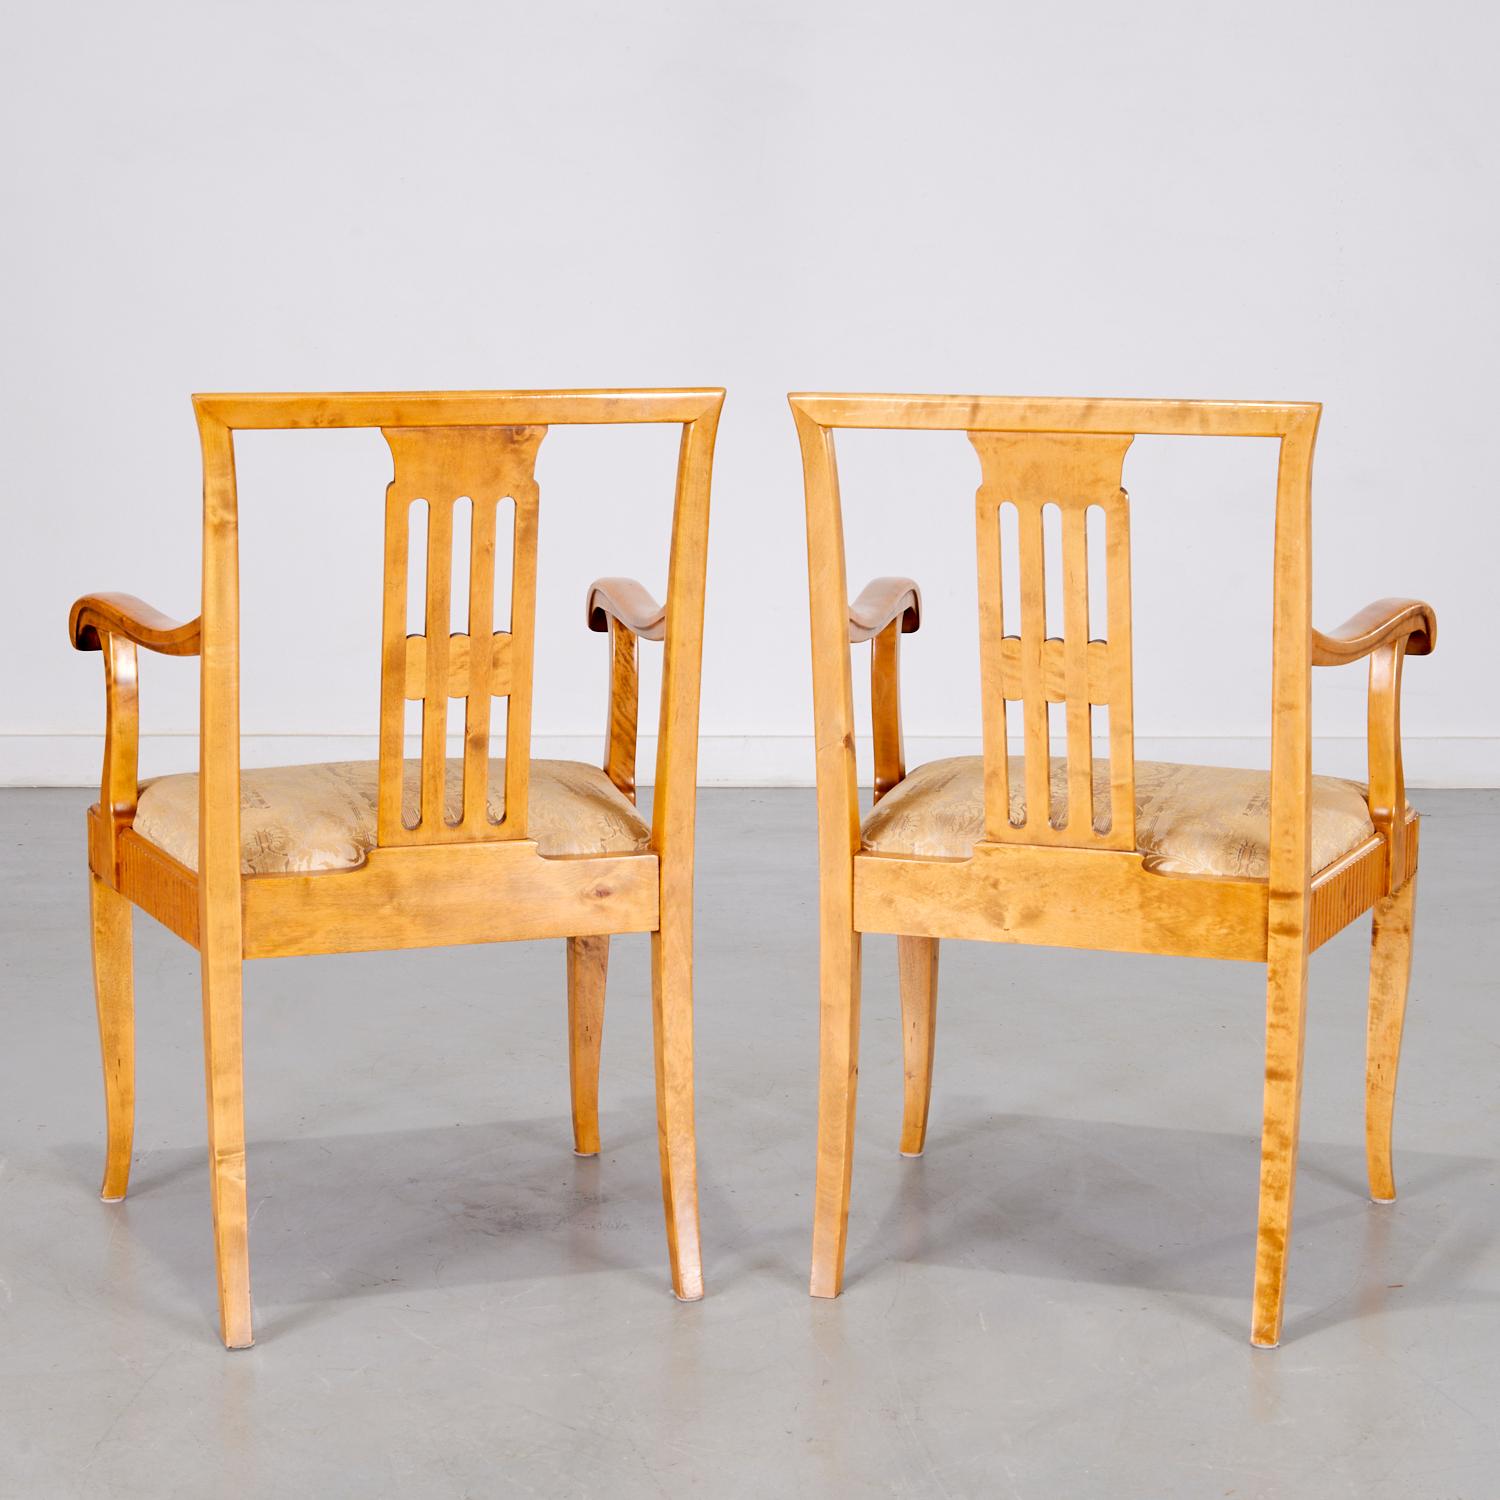 20th c. Pair of Swedish Neoclassical Birch Armchairs with Damask Upholstery For Sale 3